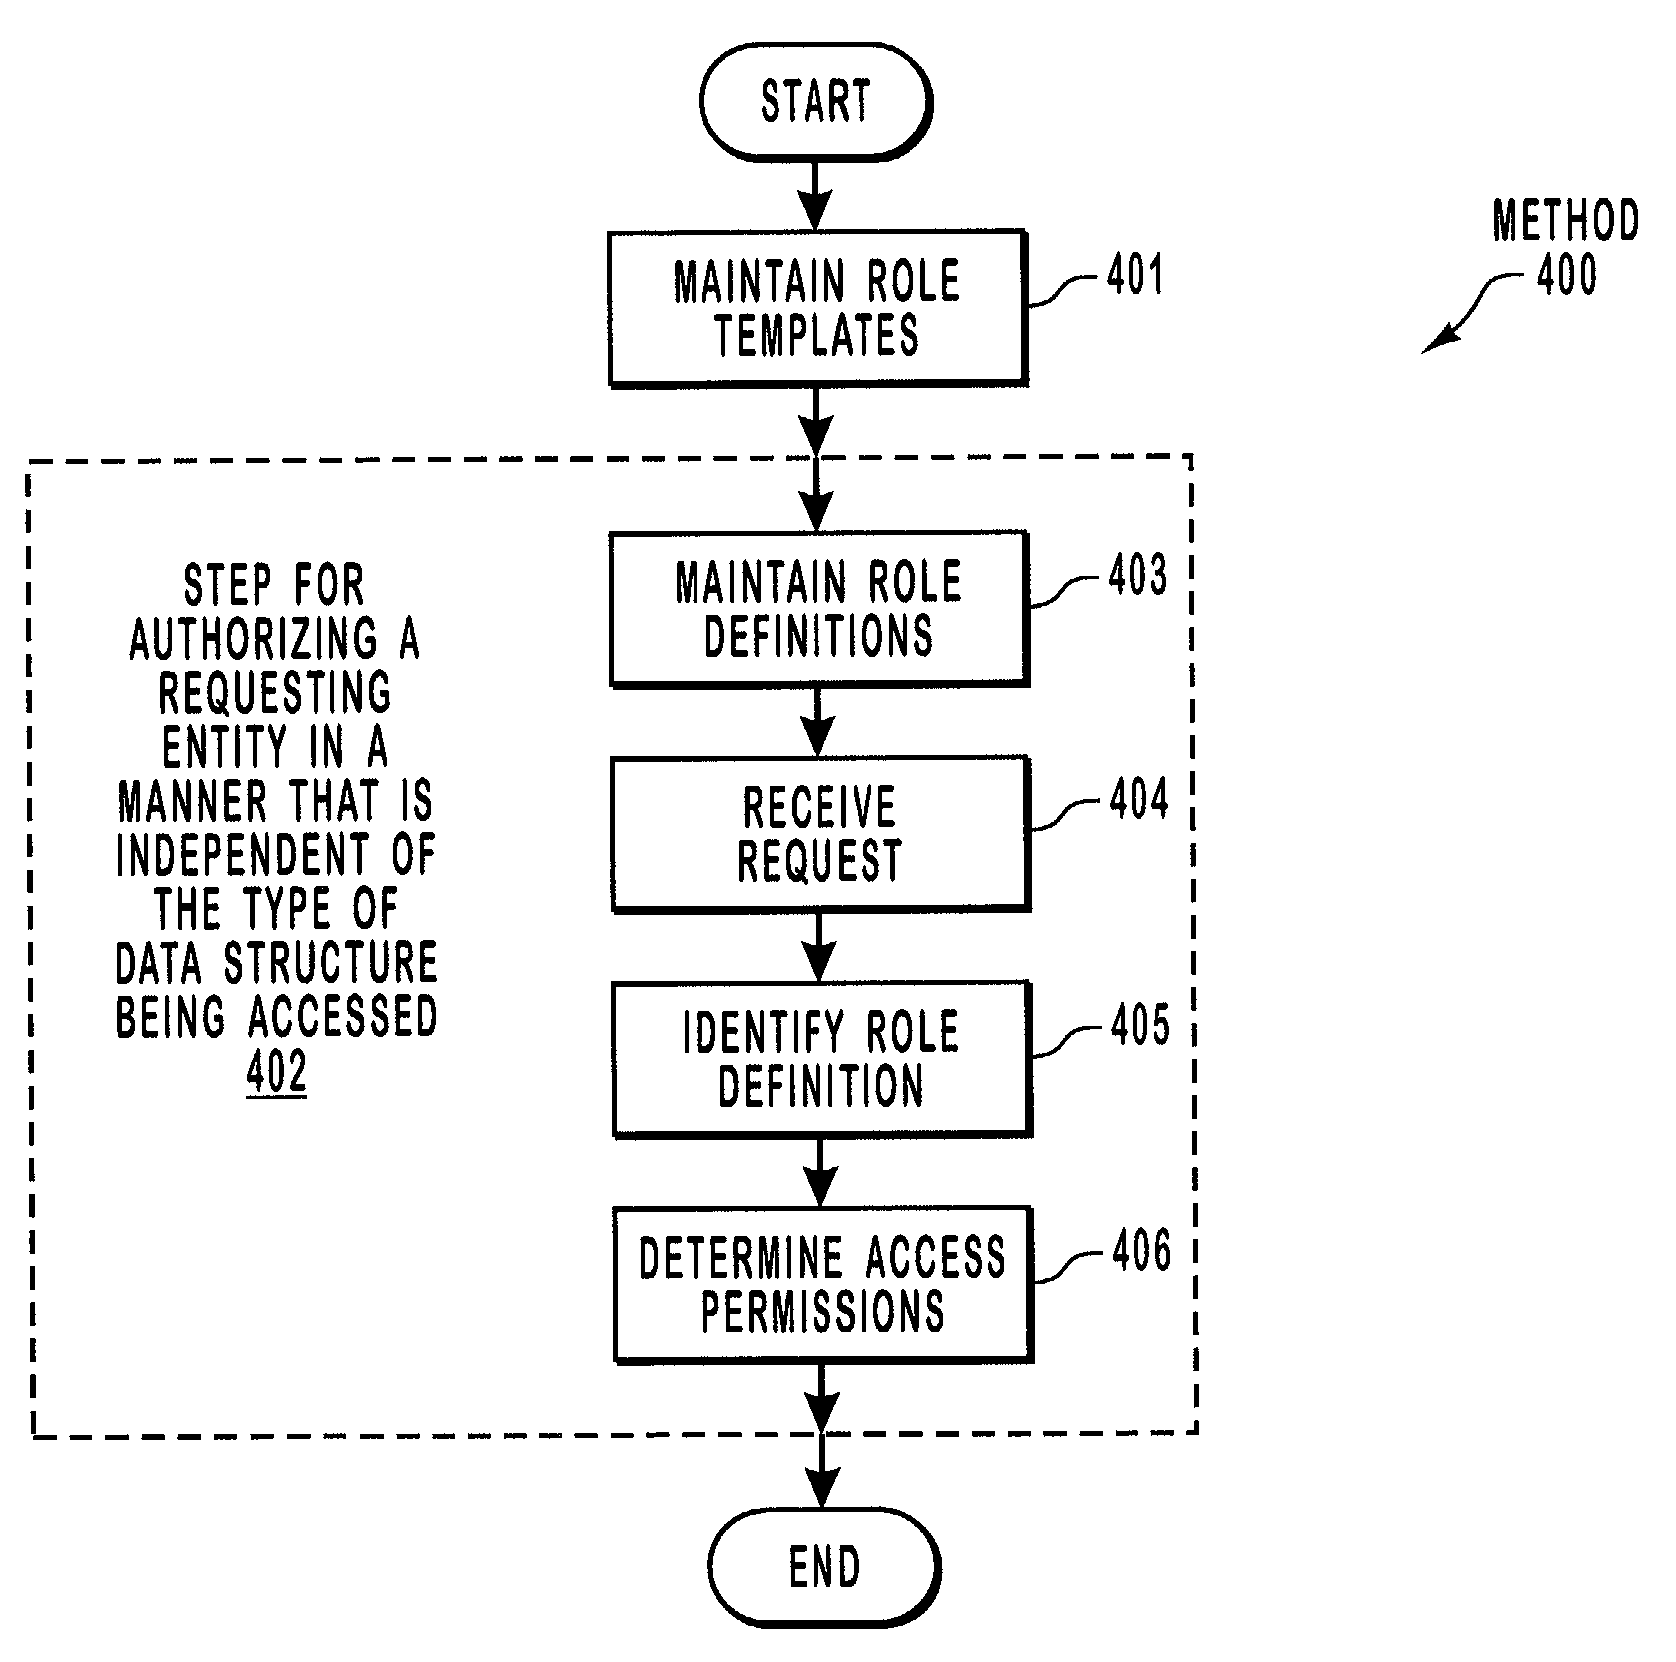 Authorizing a requesting entity to operate upon data structures